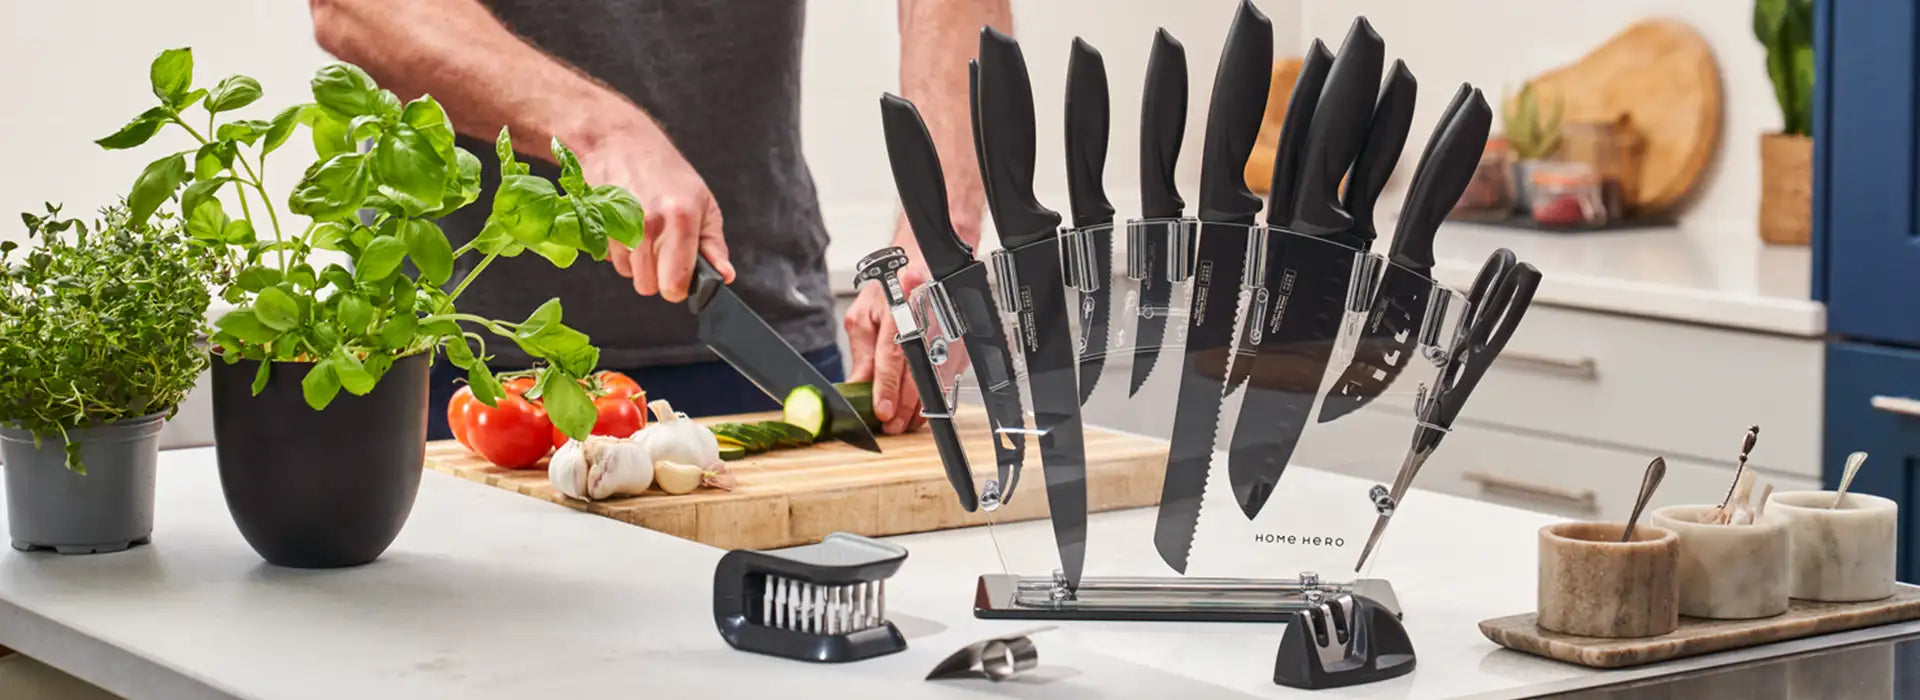 using high quality kitchen knives